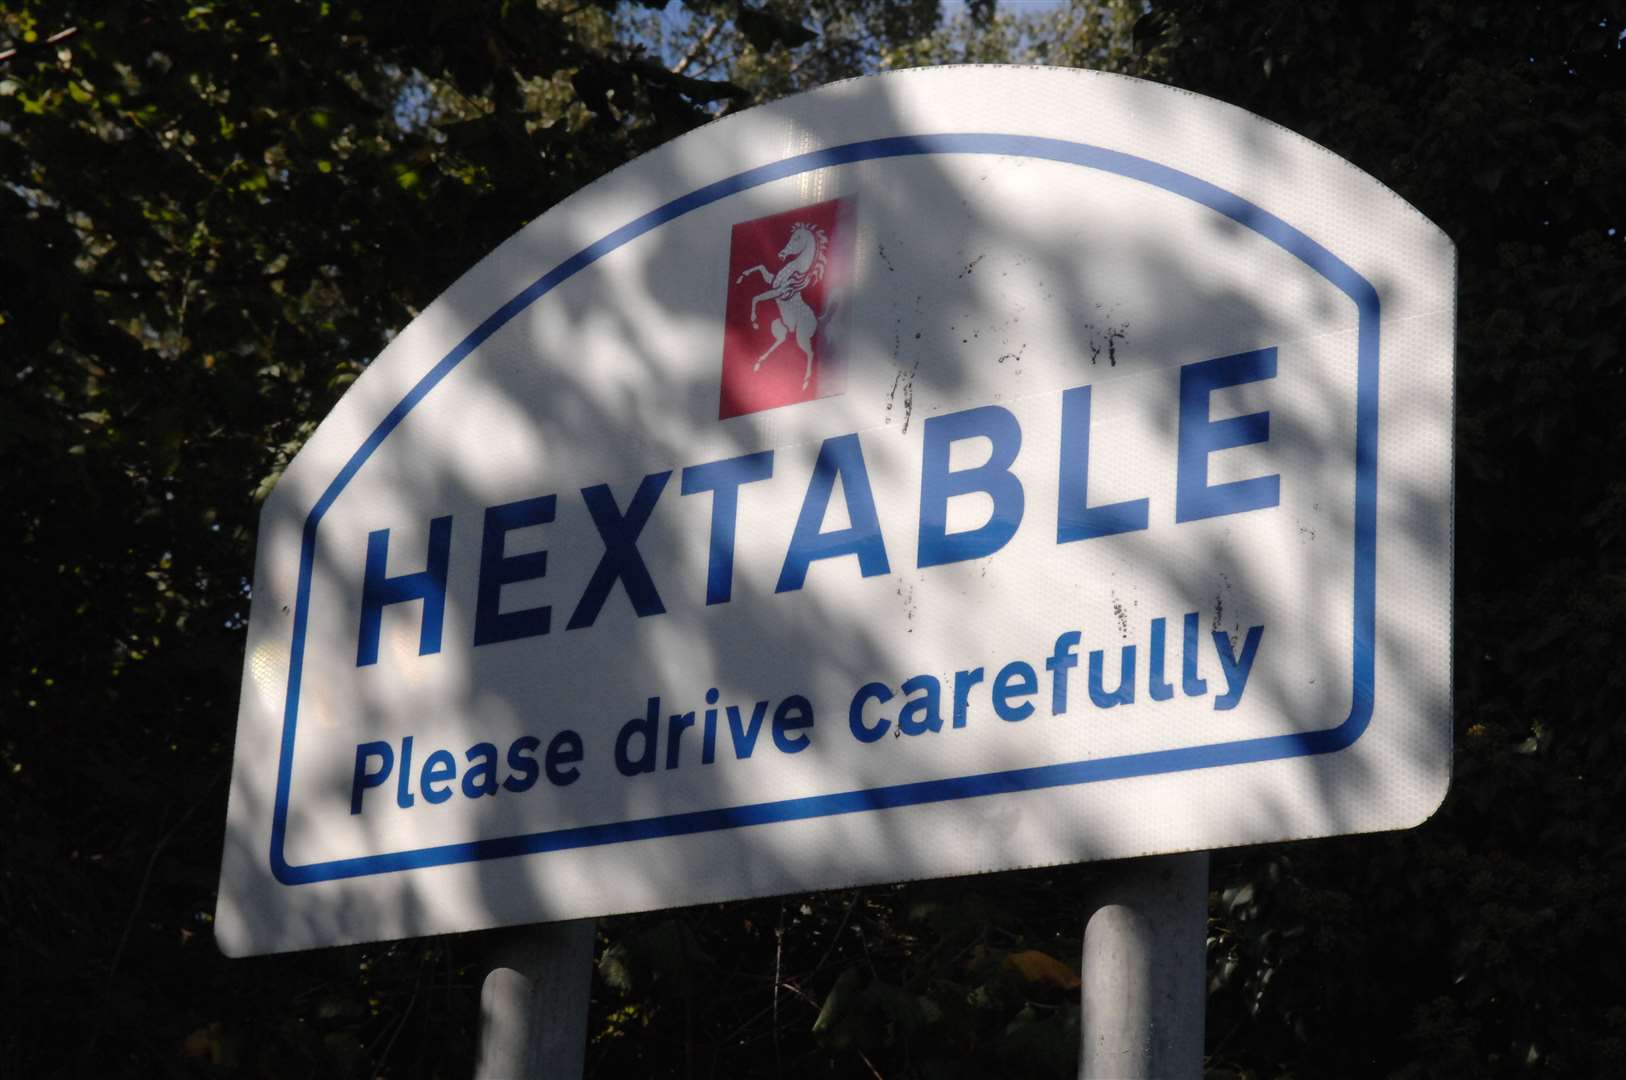 The village of Hextable...missing one key component...